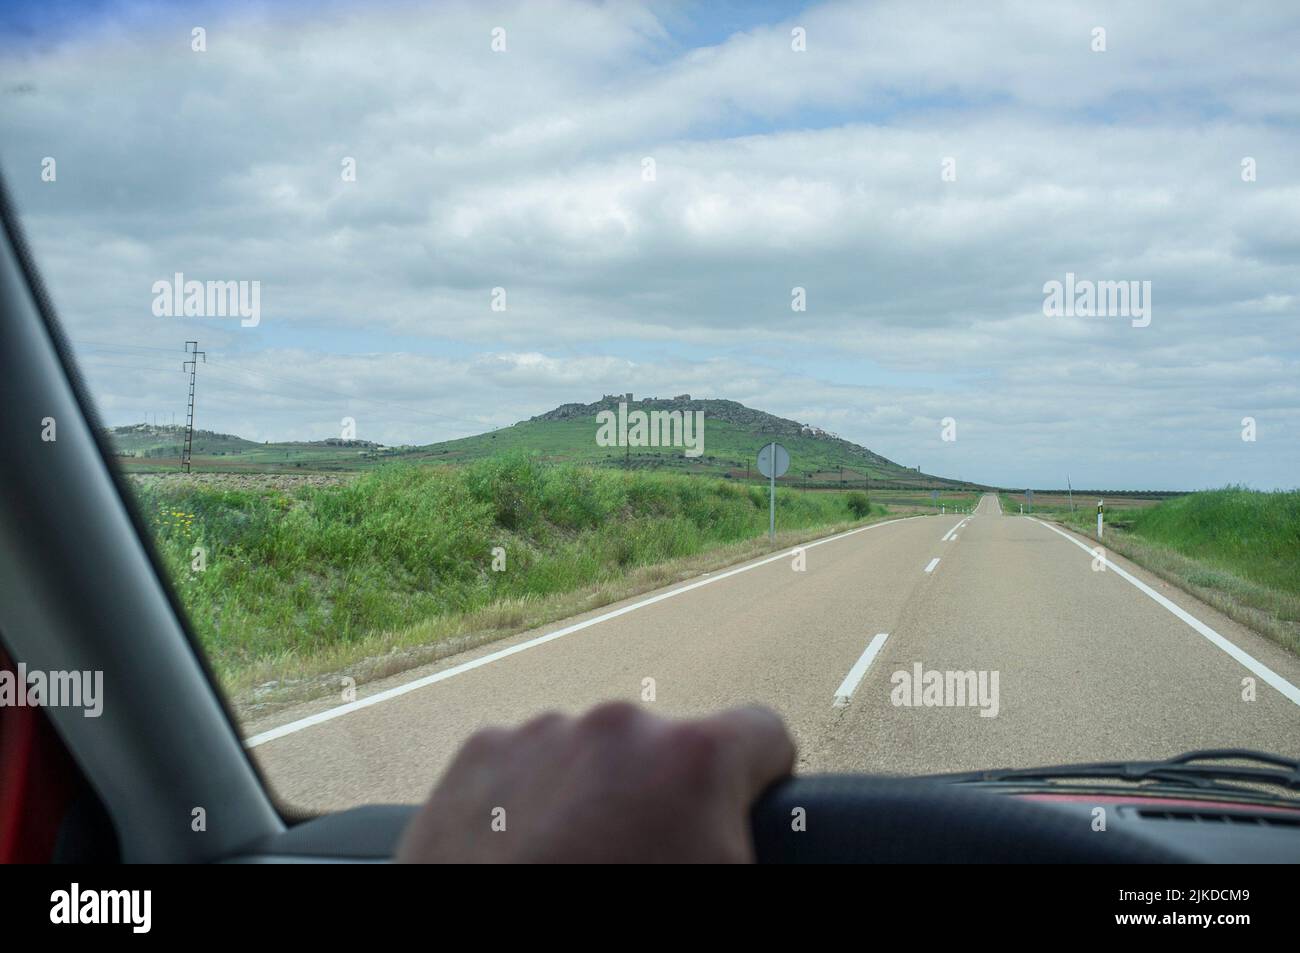 Approaching to Magacela town from EX-348 road. View from the inside of the car. Stock Photo